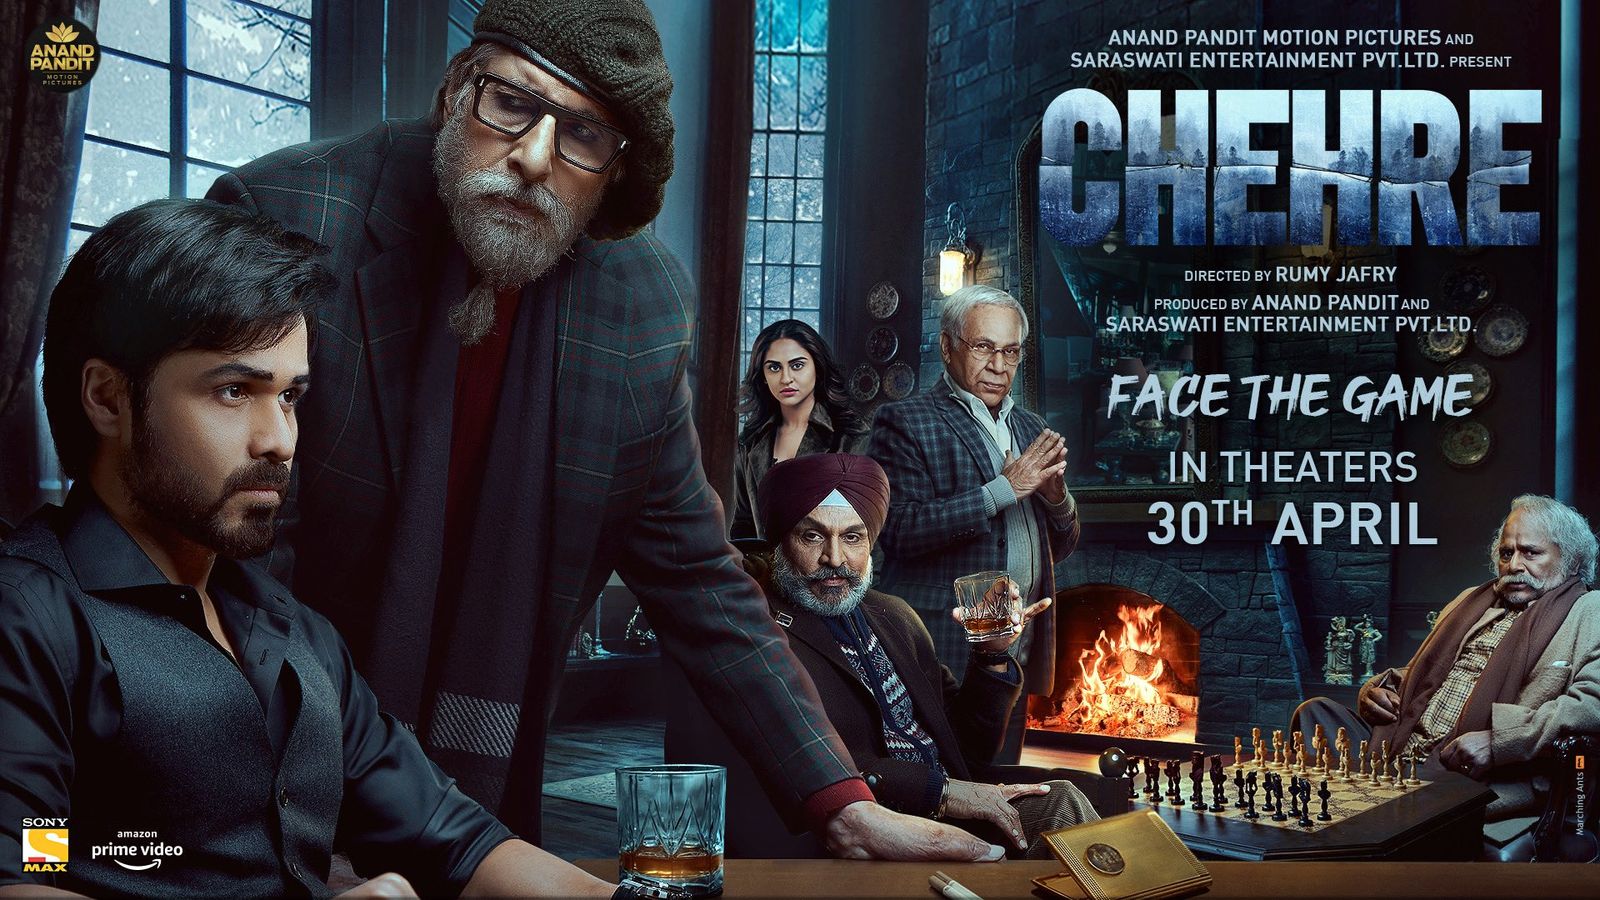 Chehre: Amitabh Bachchan, Emraan Hashmi Starrer Pushed Indefinitely Amid Rising Covid-19 Cases In The Country 